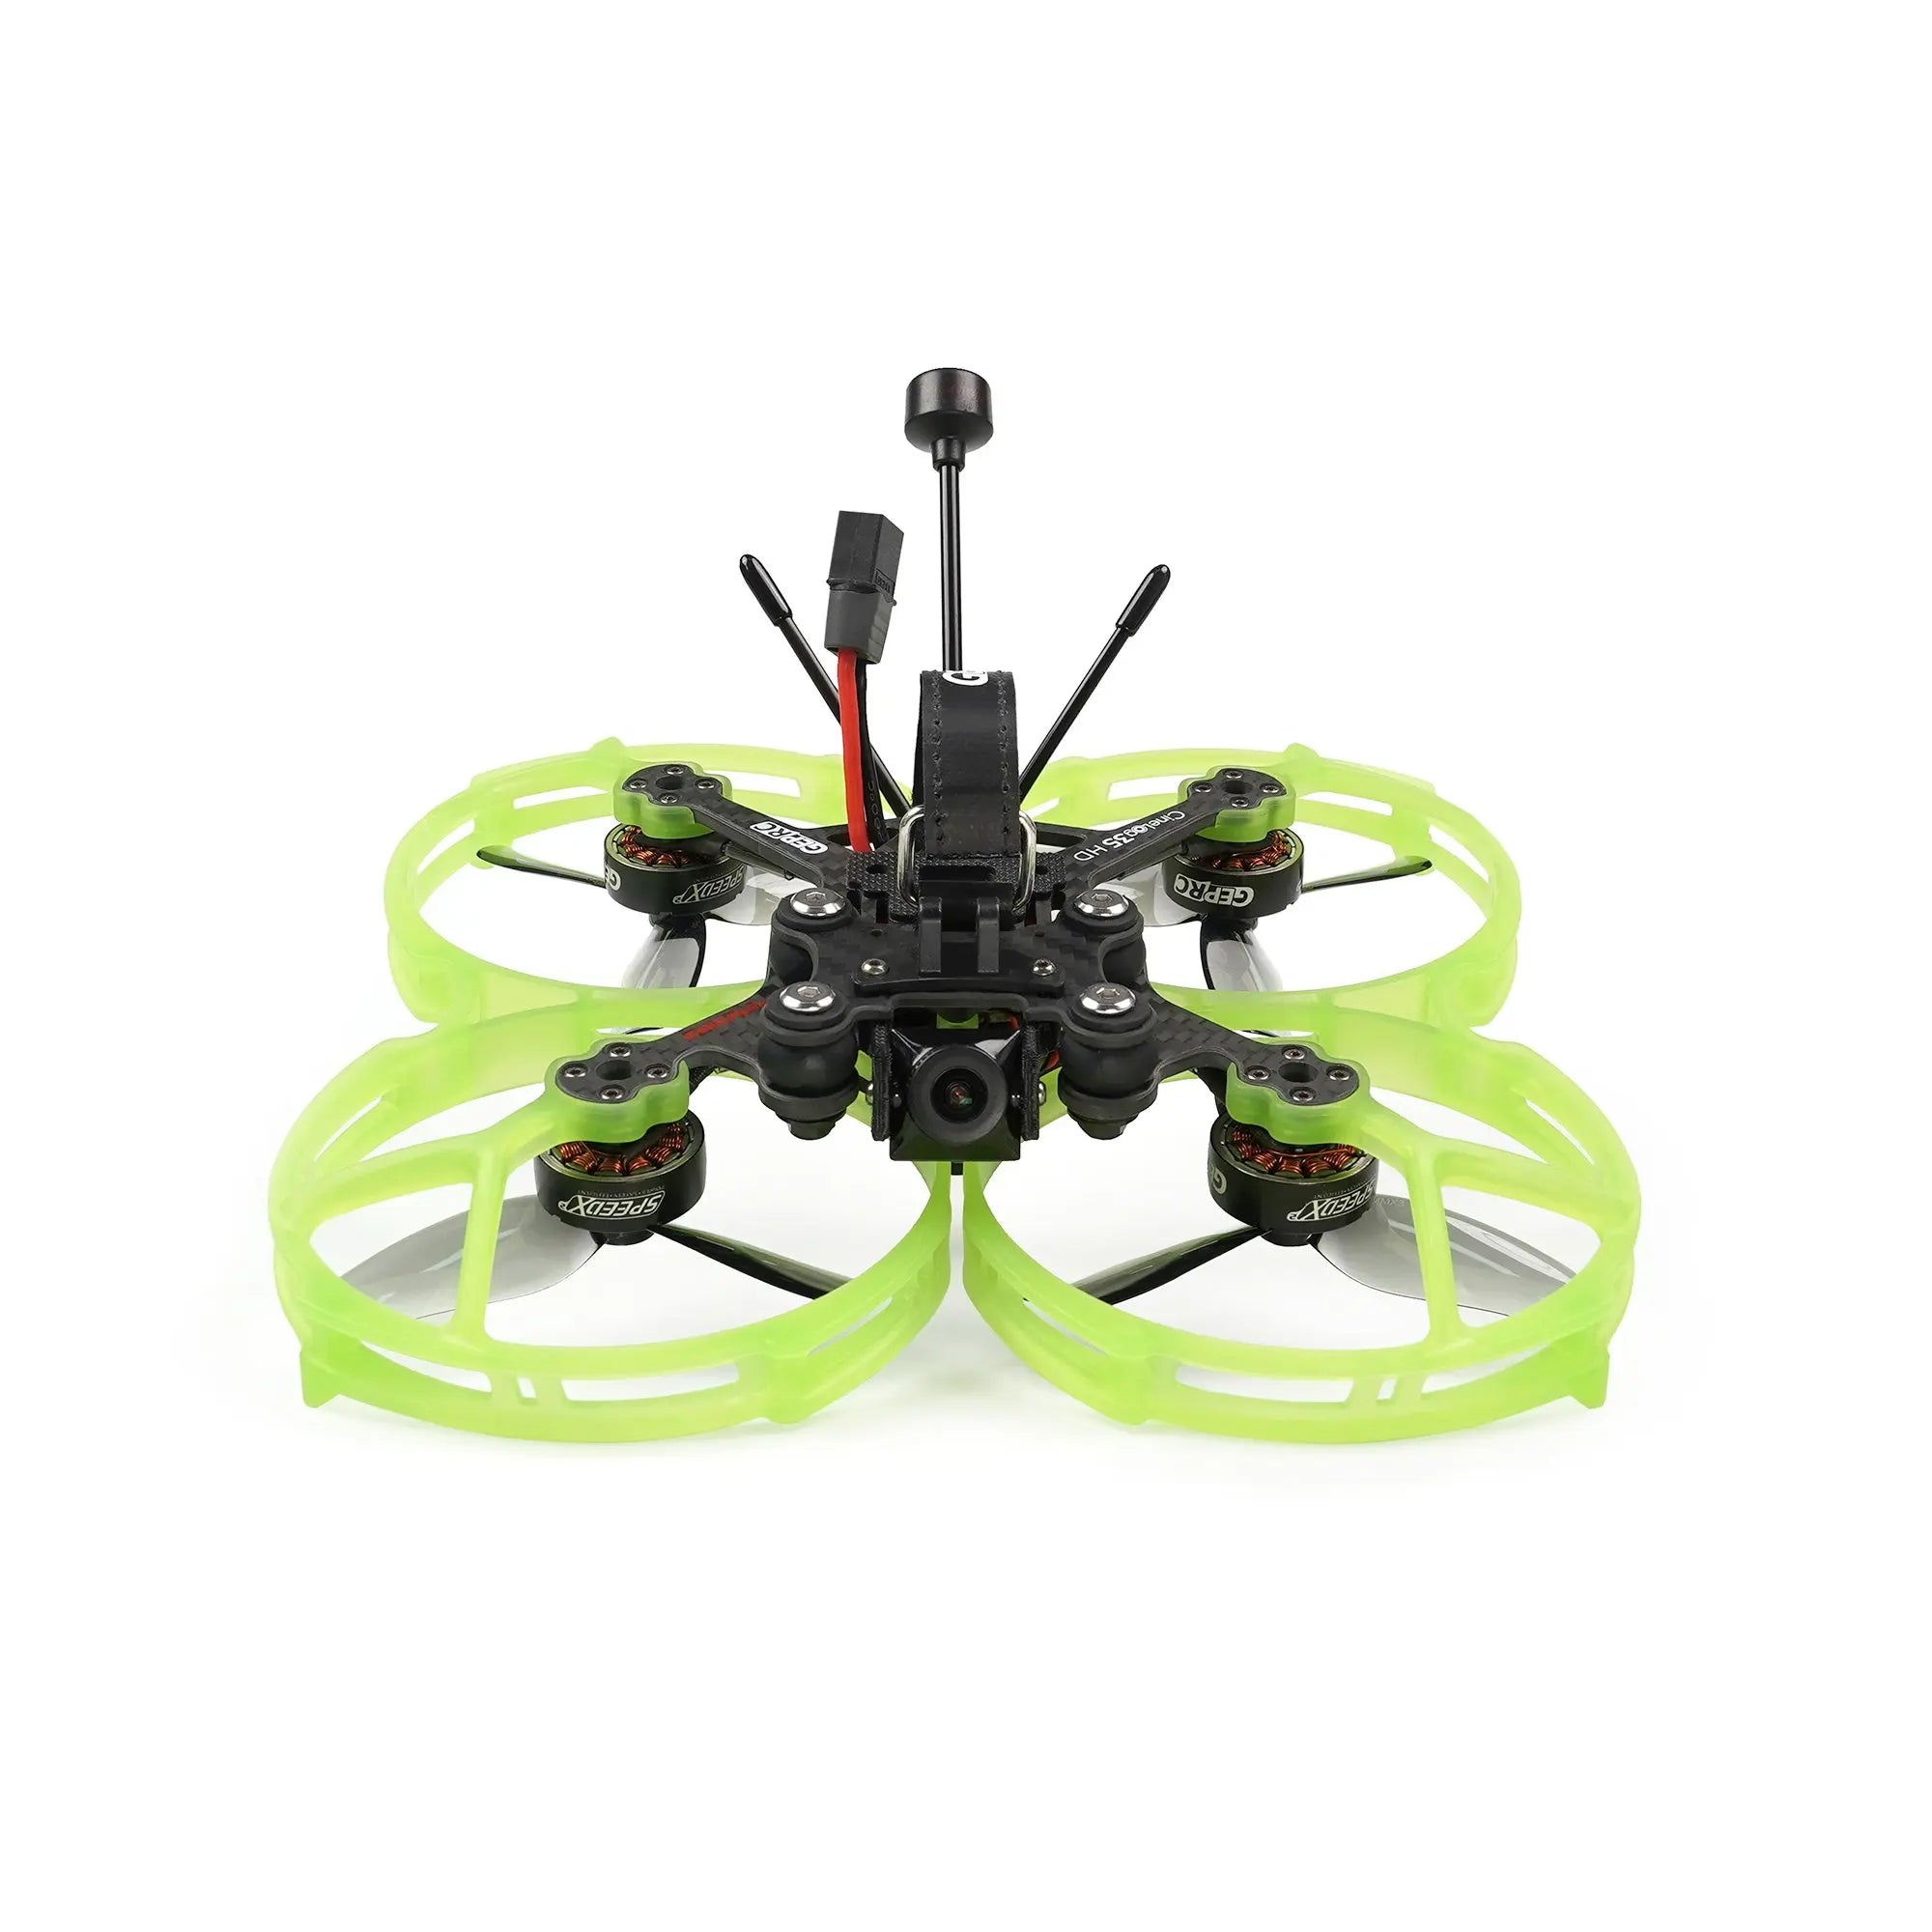 GEPRC CineLog35 Cinewhoop FPV Drone, 1.6W high power RAD VTX, strong anti-interference ability .